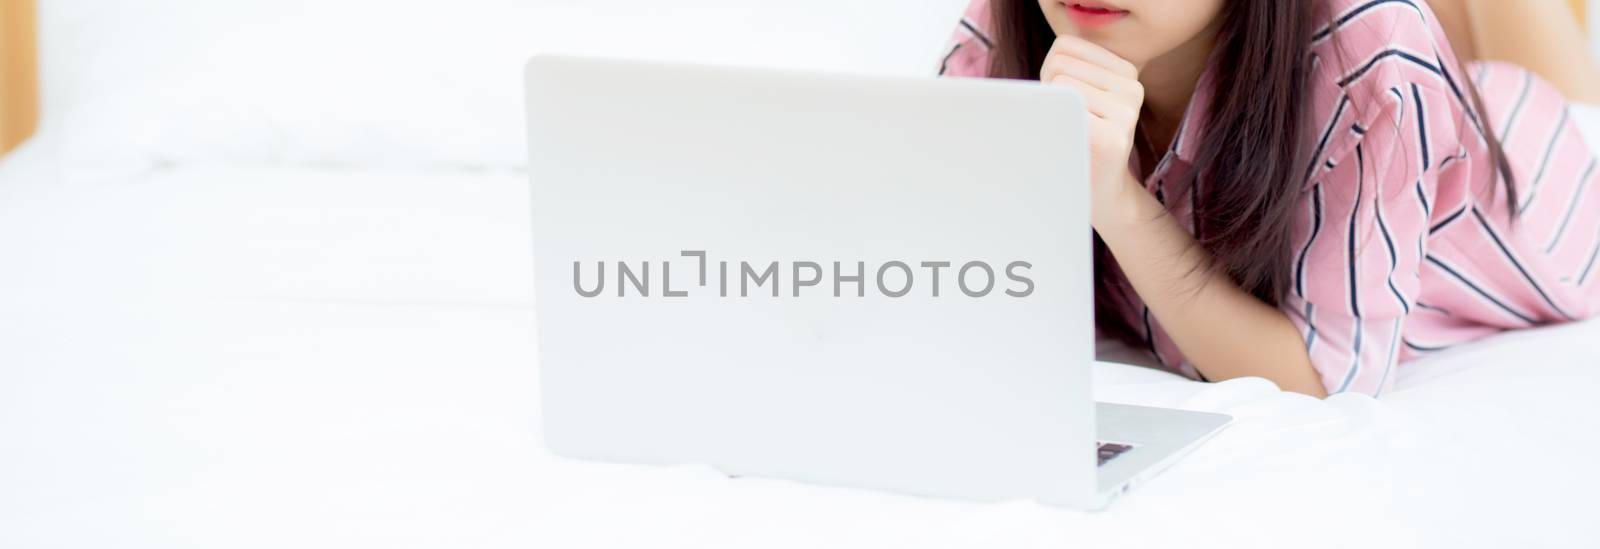 Banner website asian young woman lying on bed using laptop at bedroom for leisure and relax, freelance with girl working notebook, communication concept.